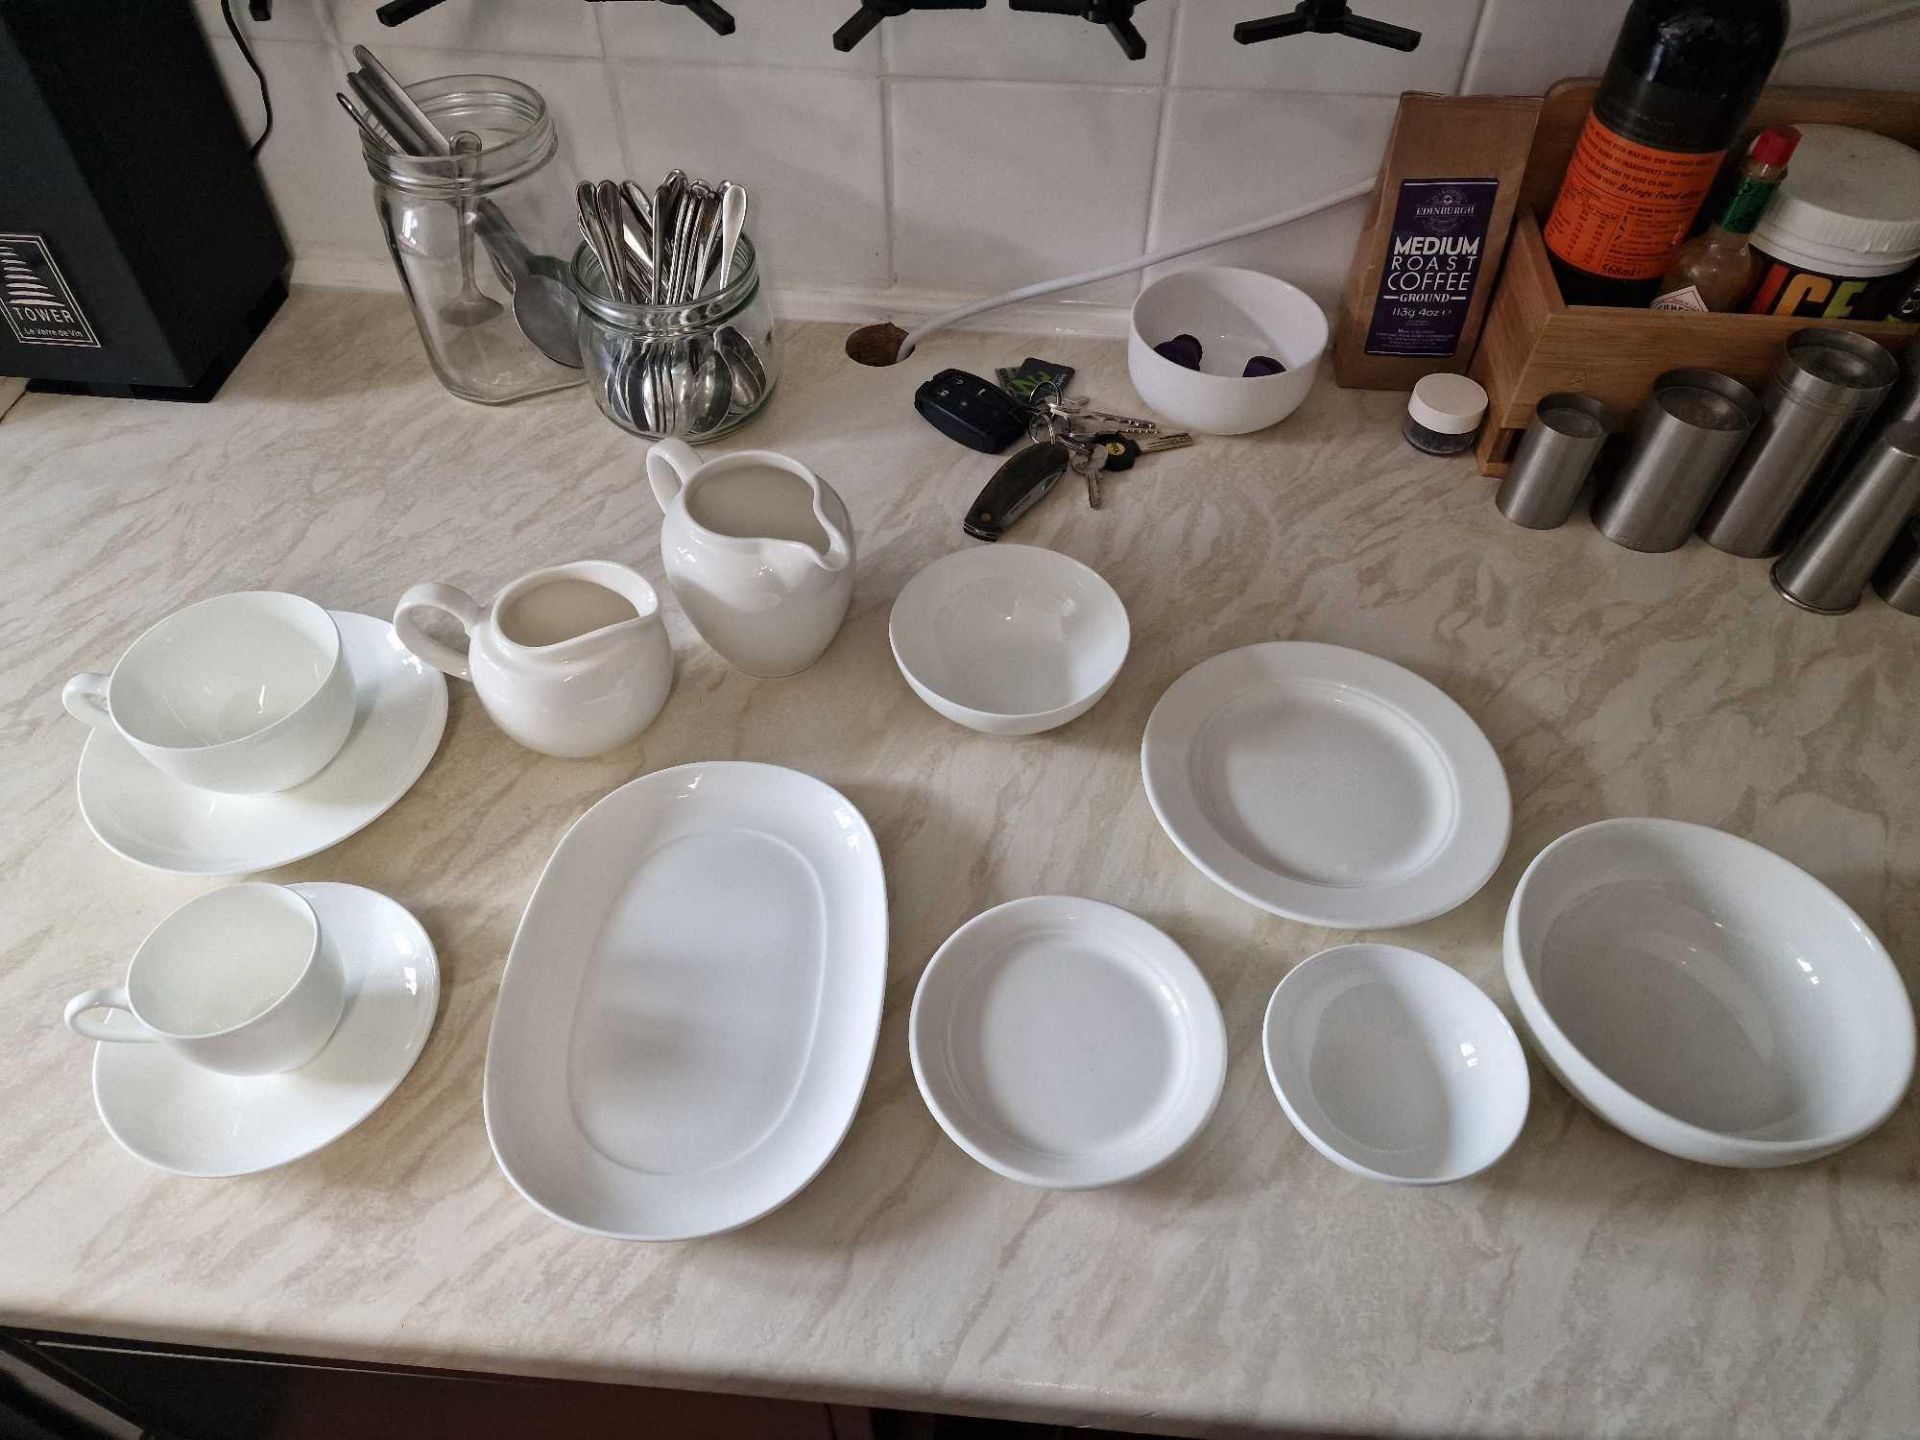 Various Villeroy And Boch White Tea Service Elements To Include Cups, Saucers, Sugar Bowls, Jugs